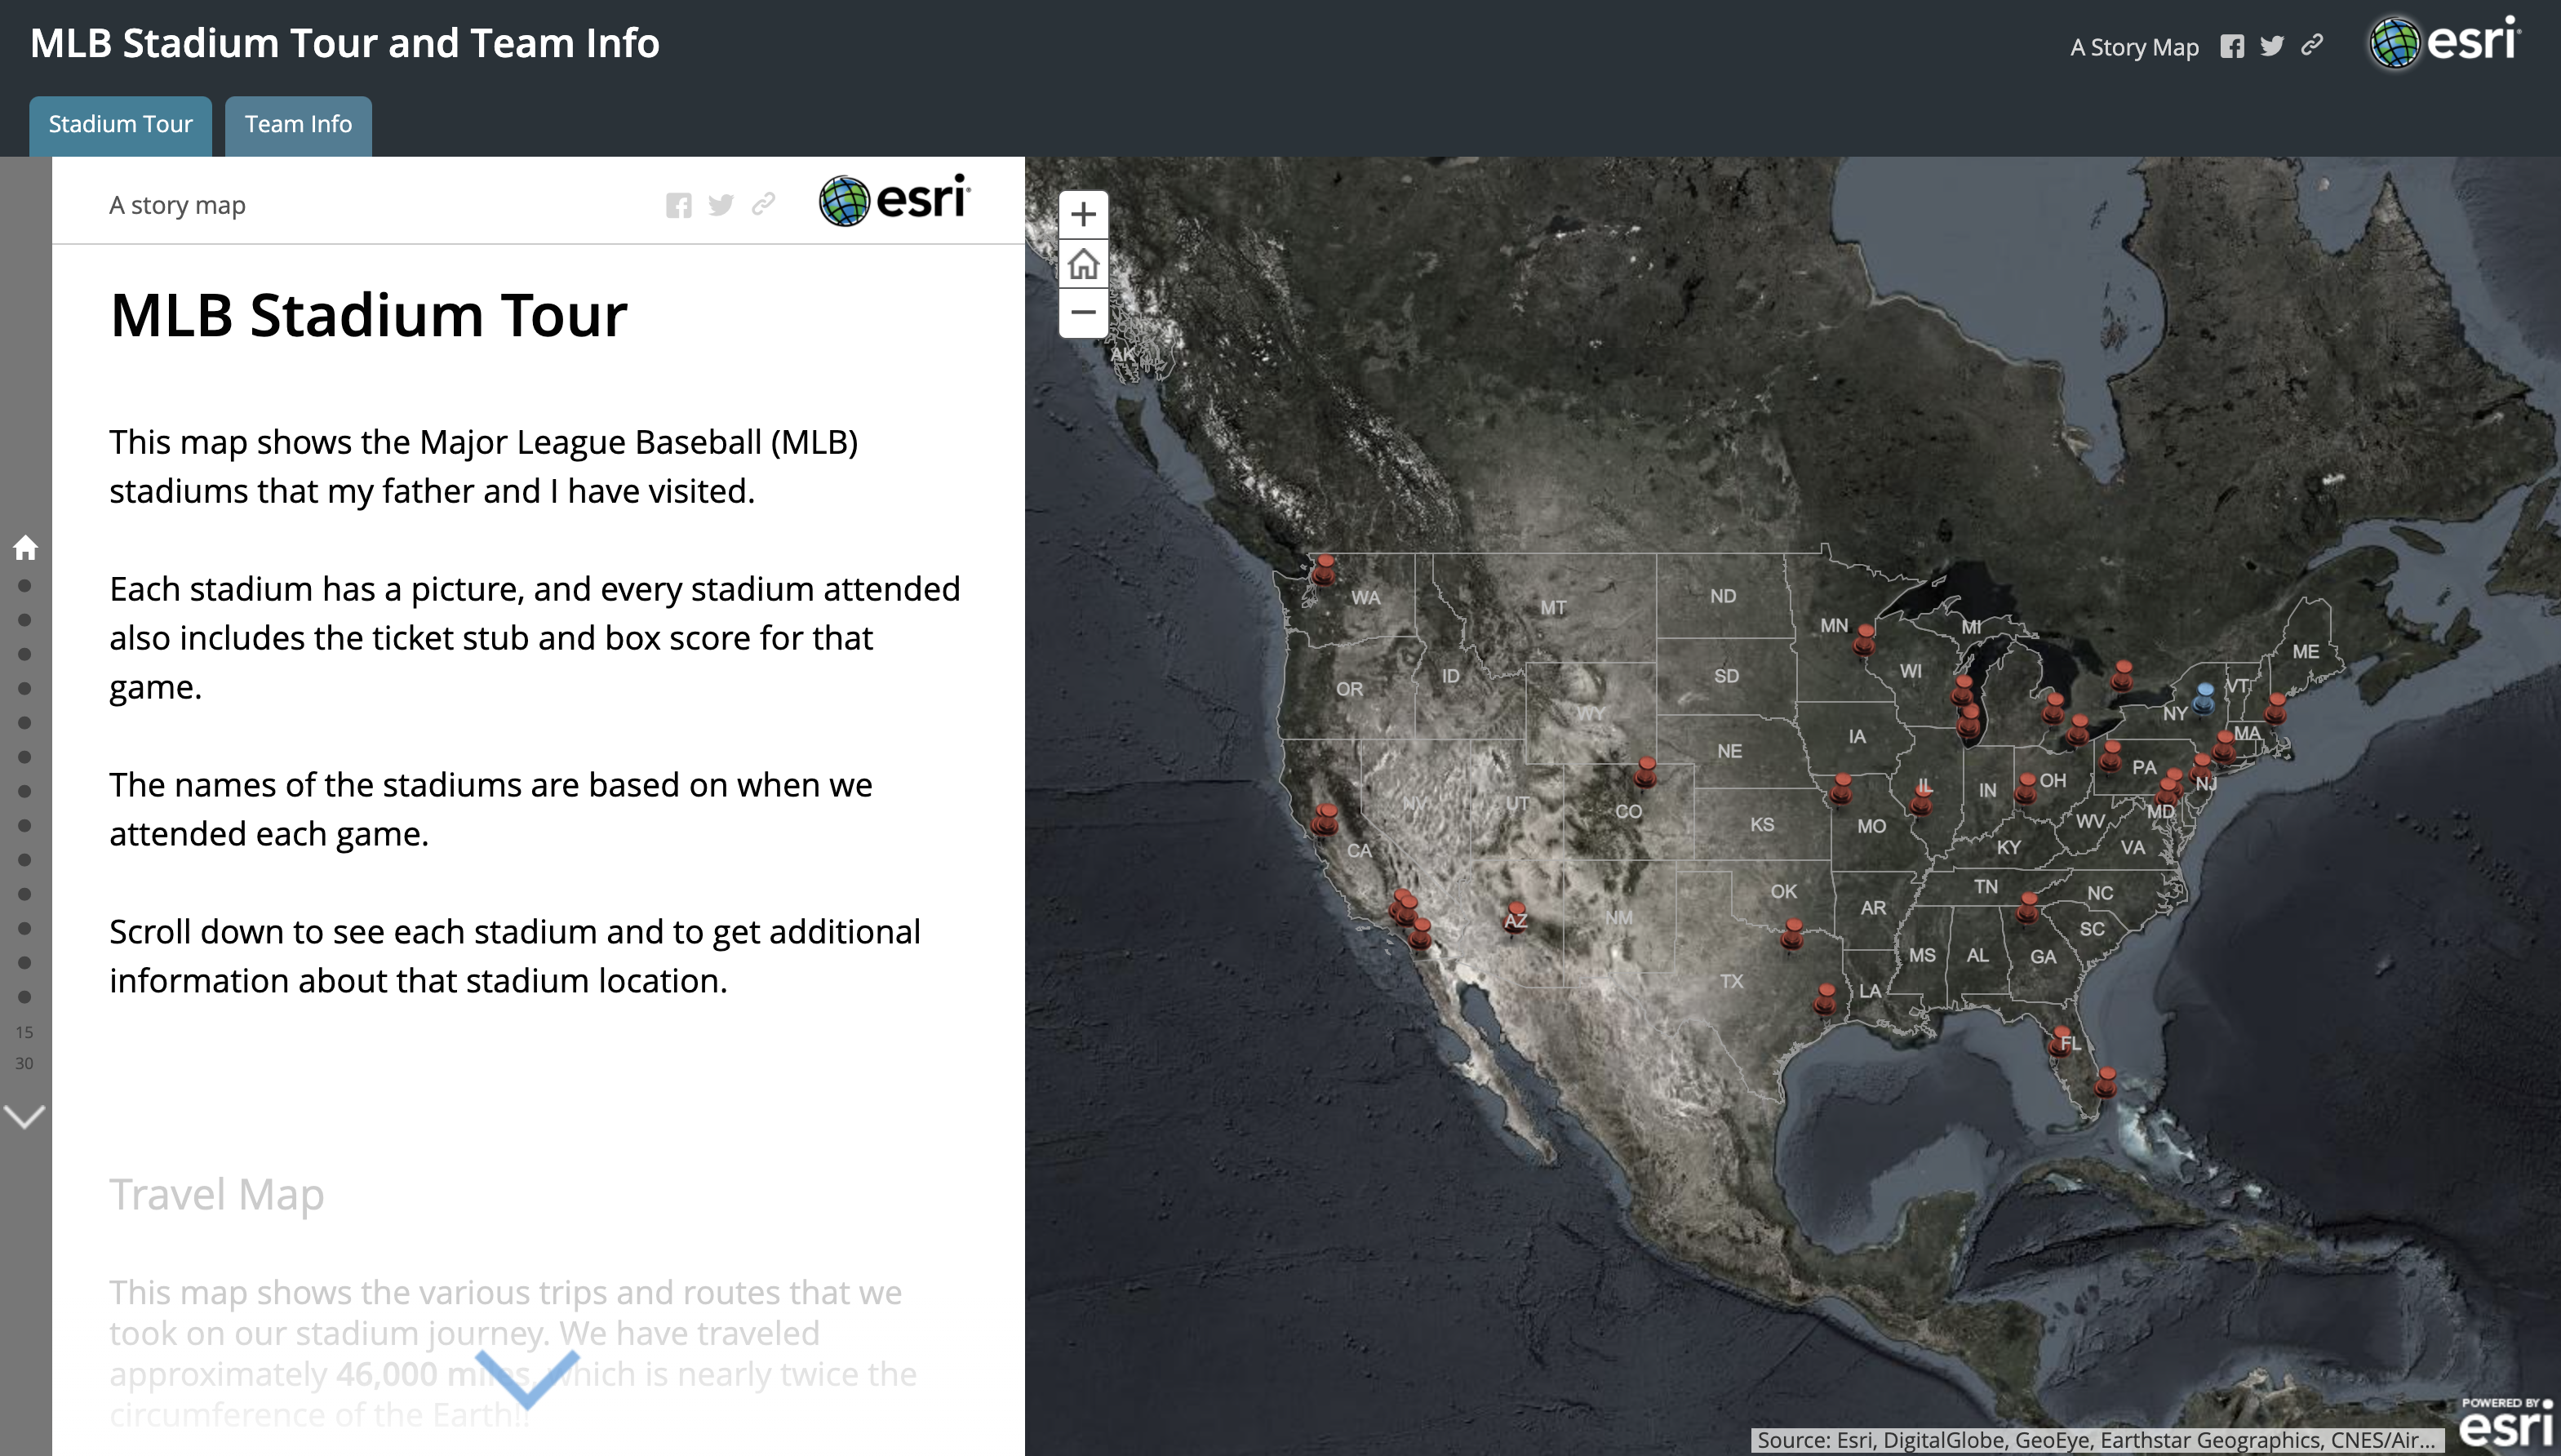 “Play Ball!” Story Map